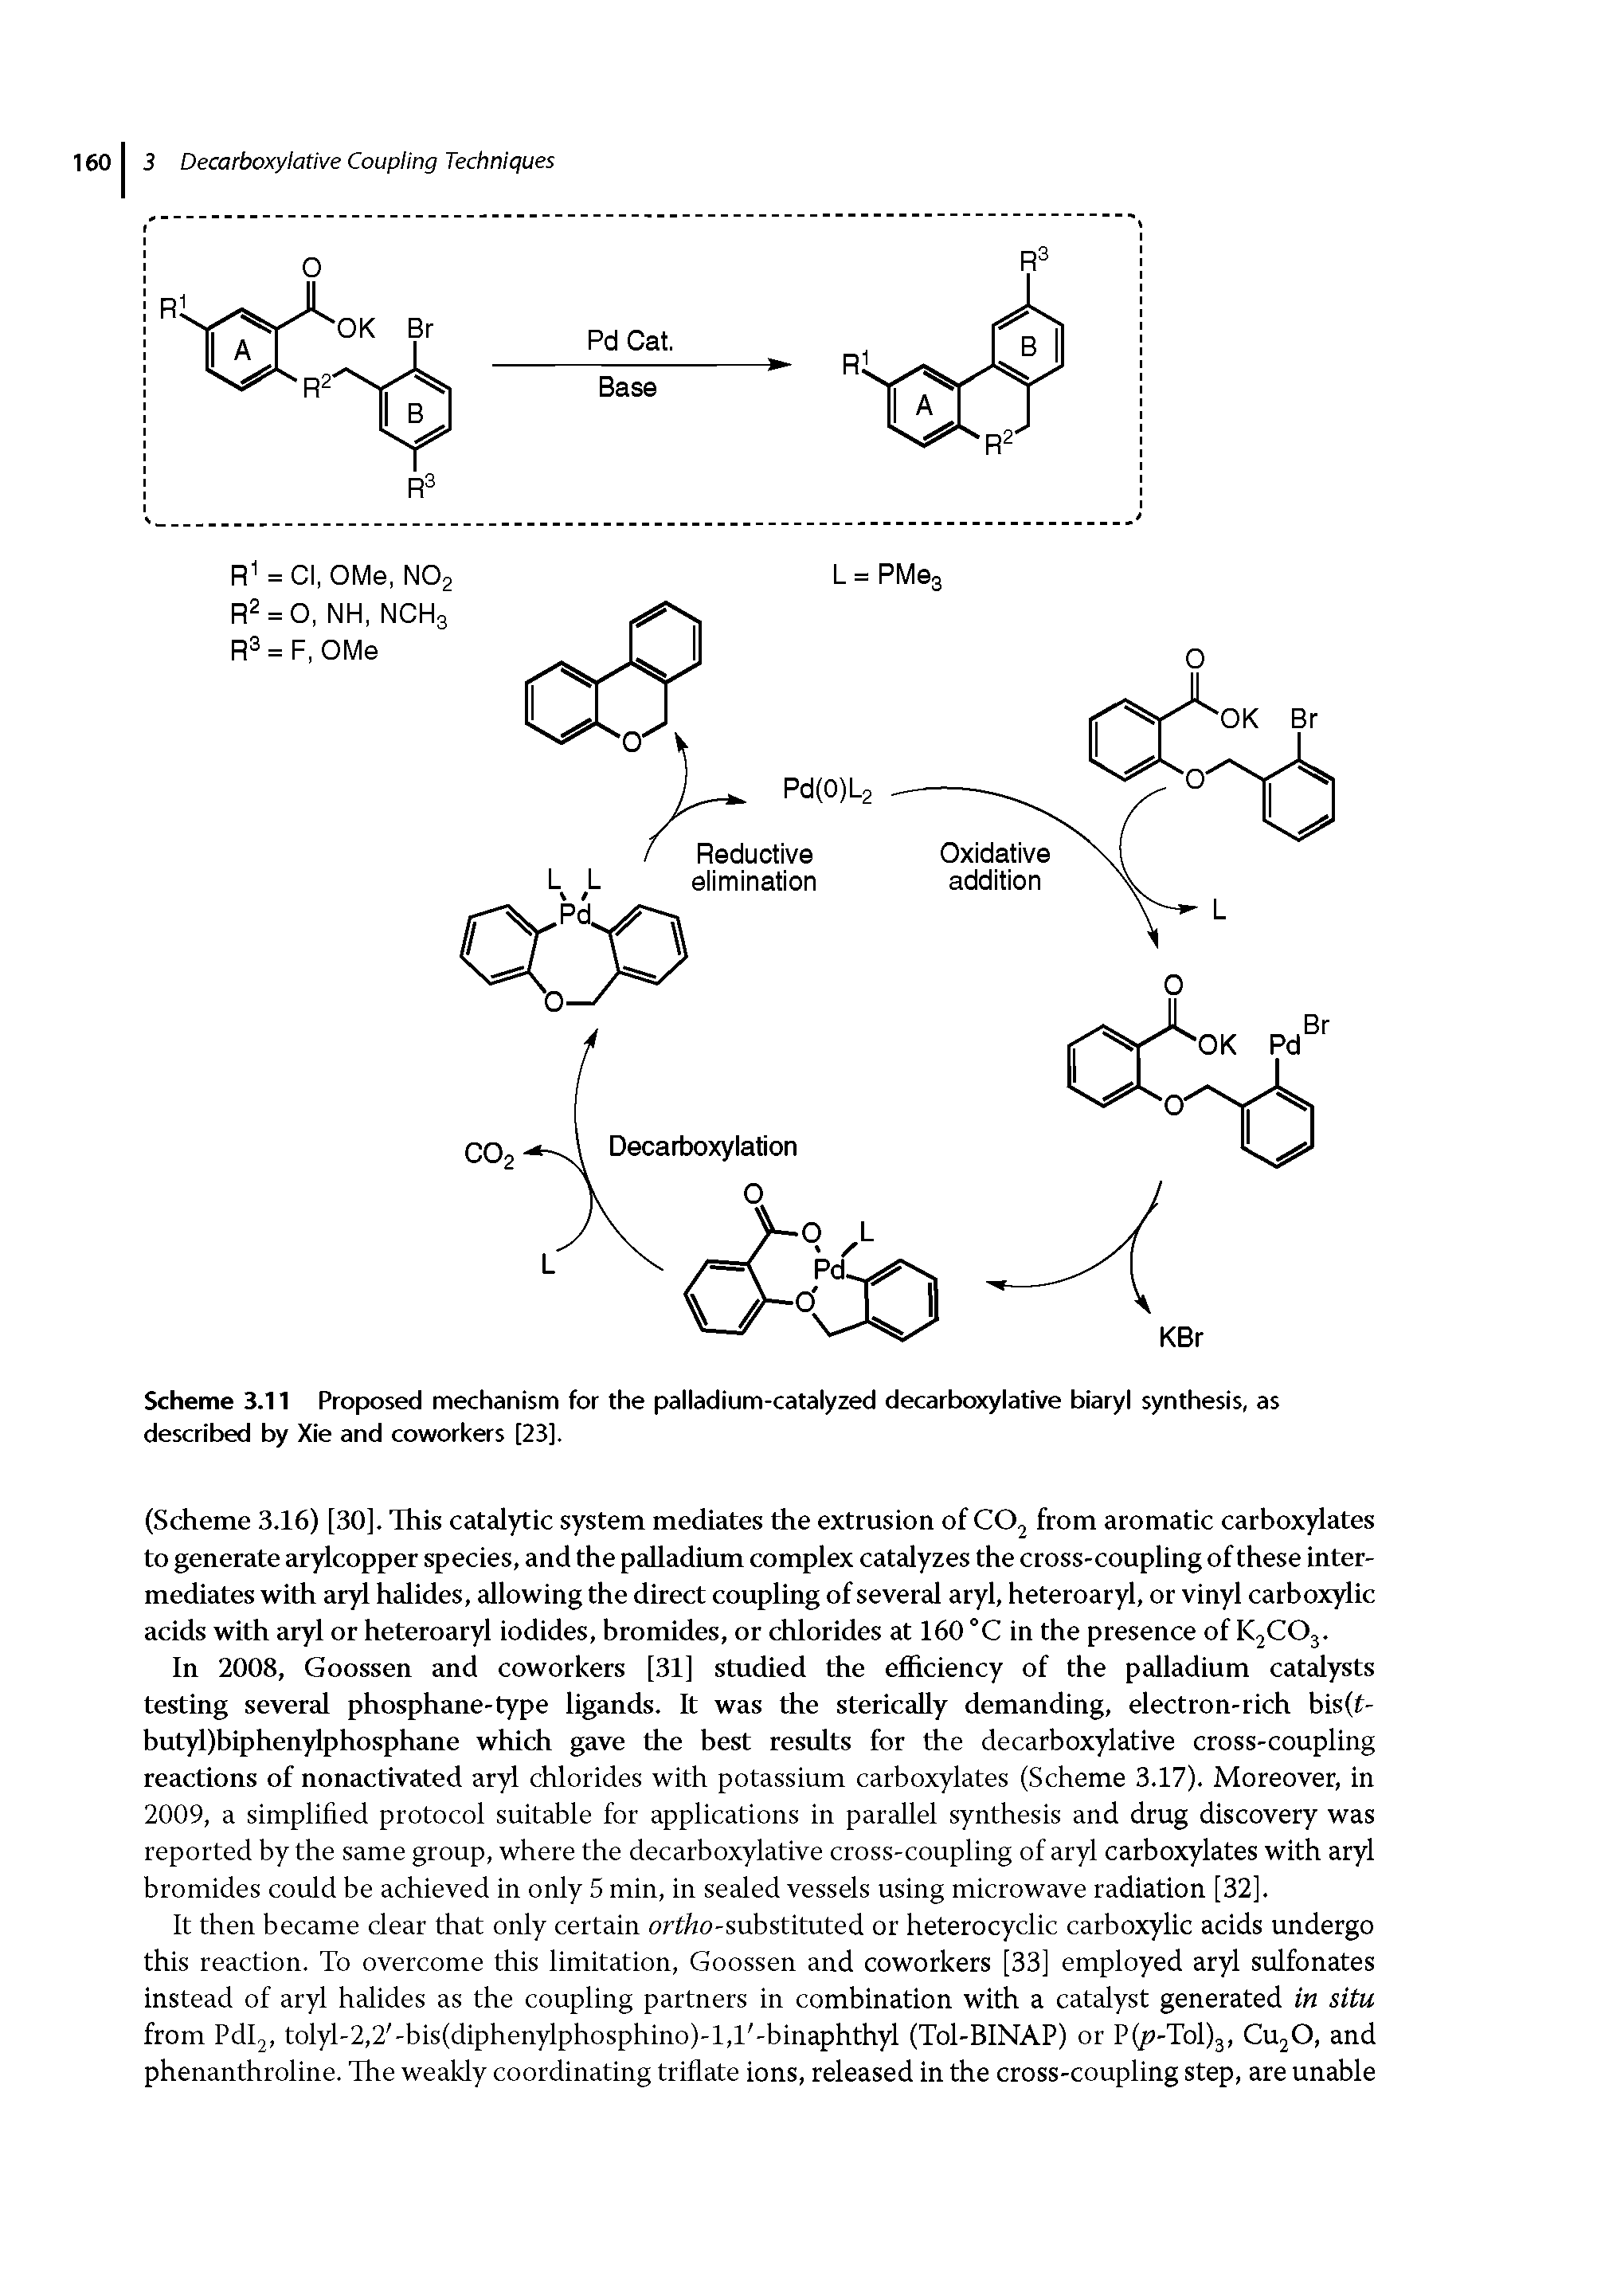 Scheme 3.11 Proposed mechanism for the palladium-catalyzed decarboxylative biaryl synthesis, as described by Xie and coworkers [23],...